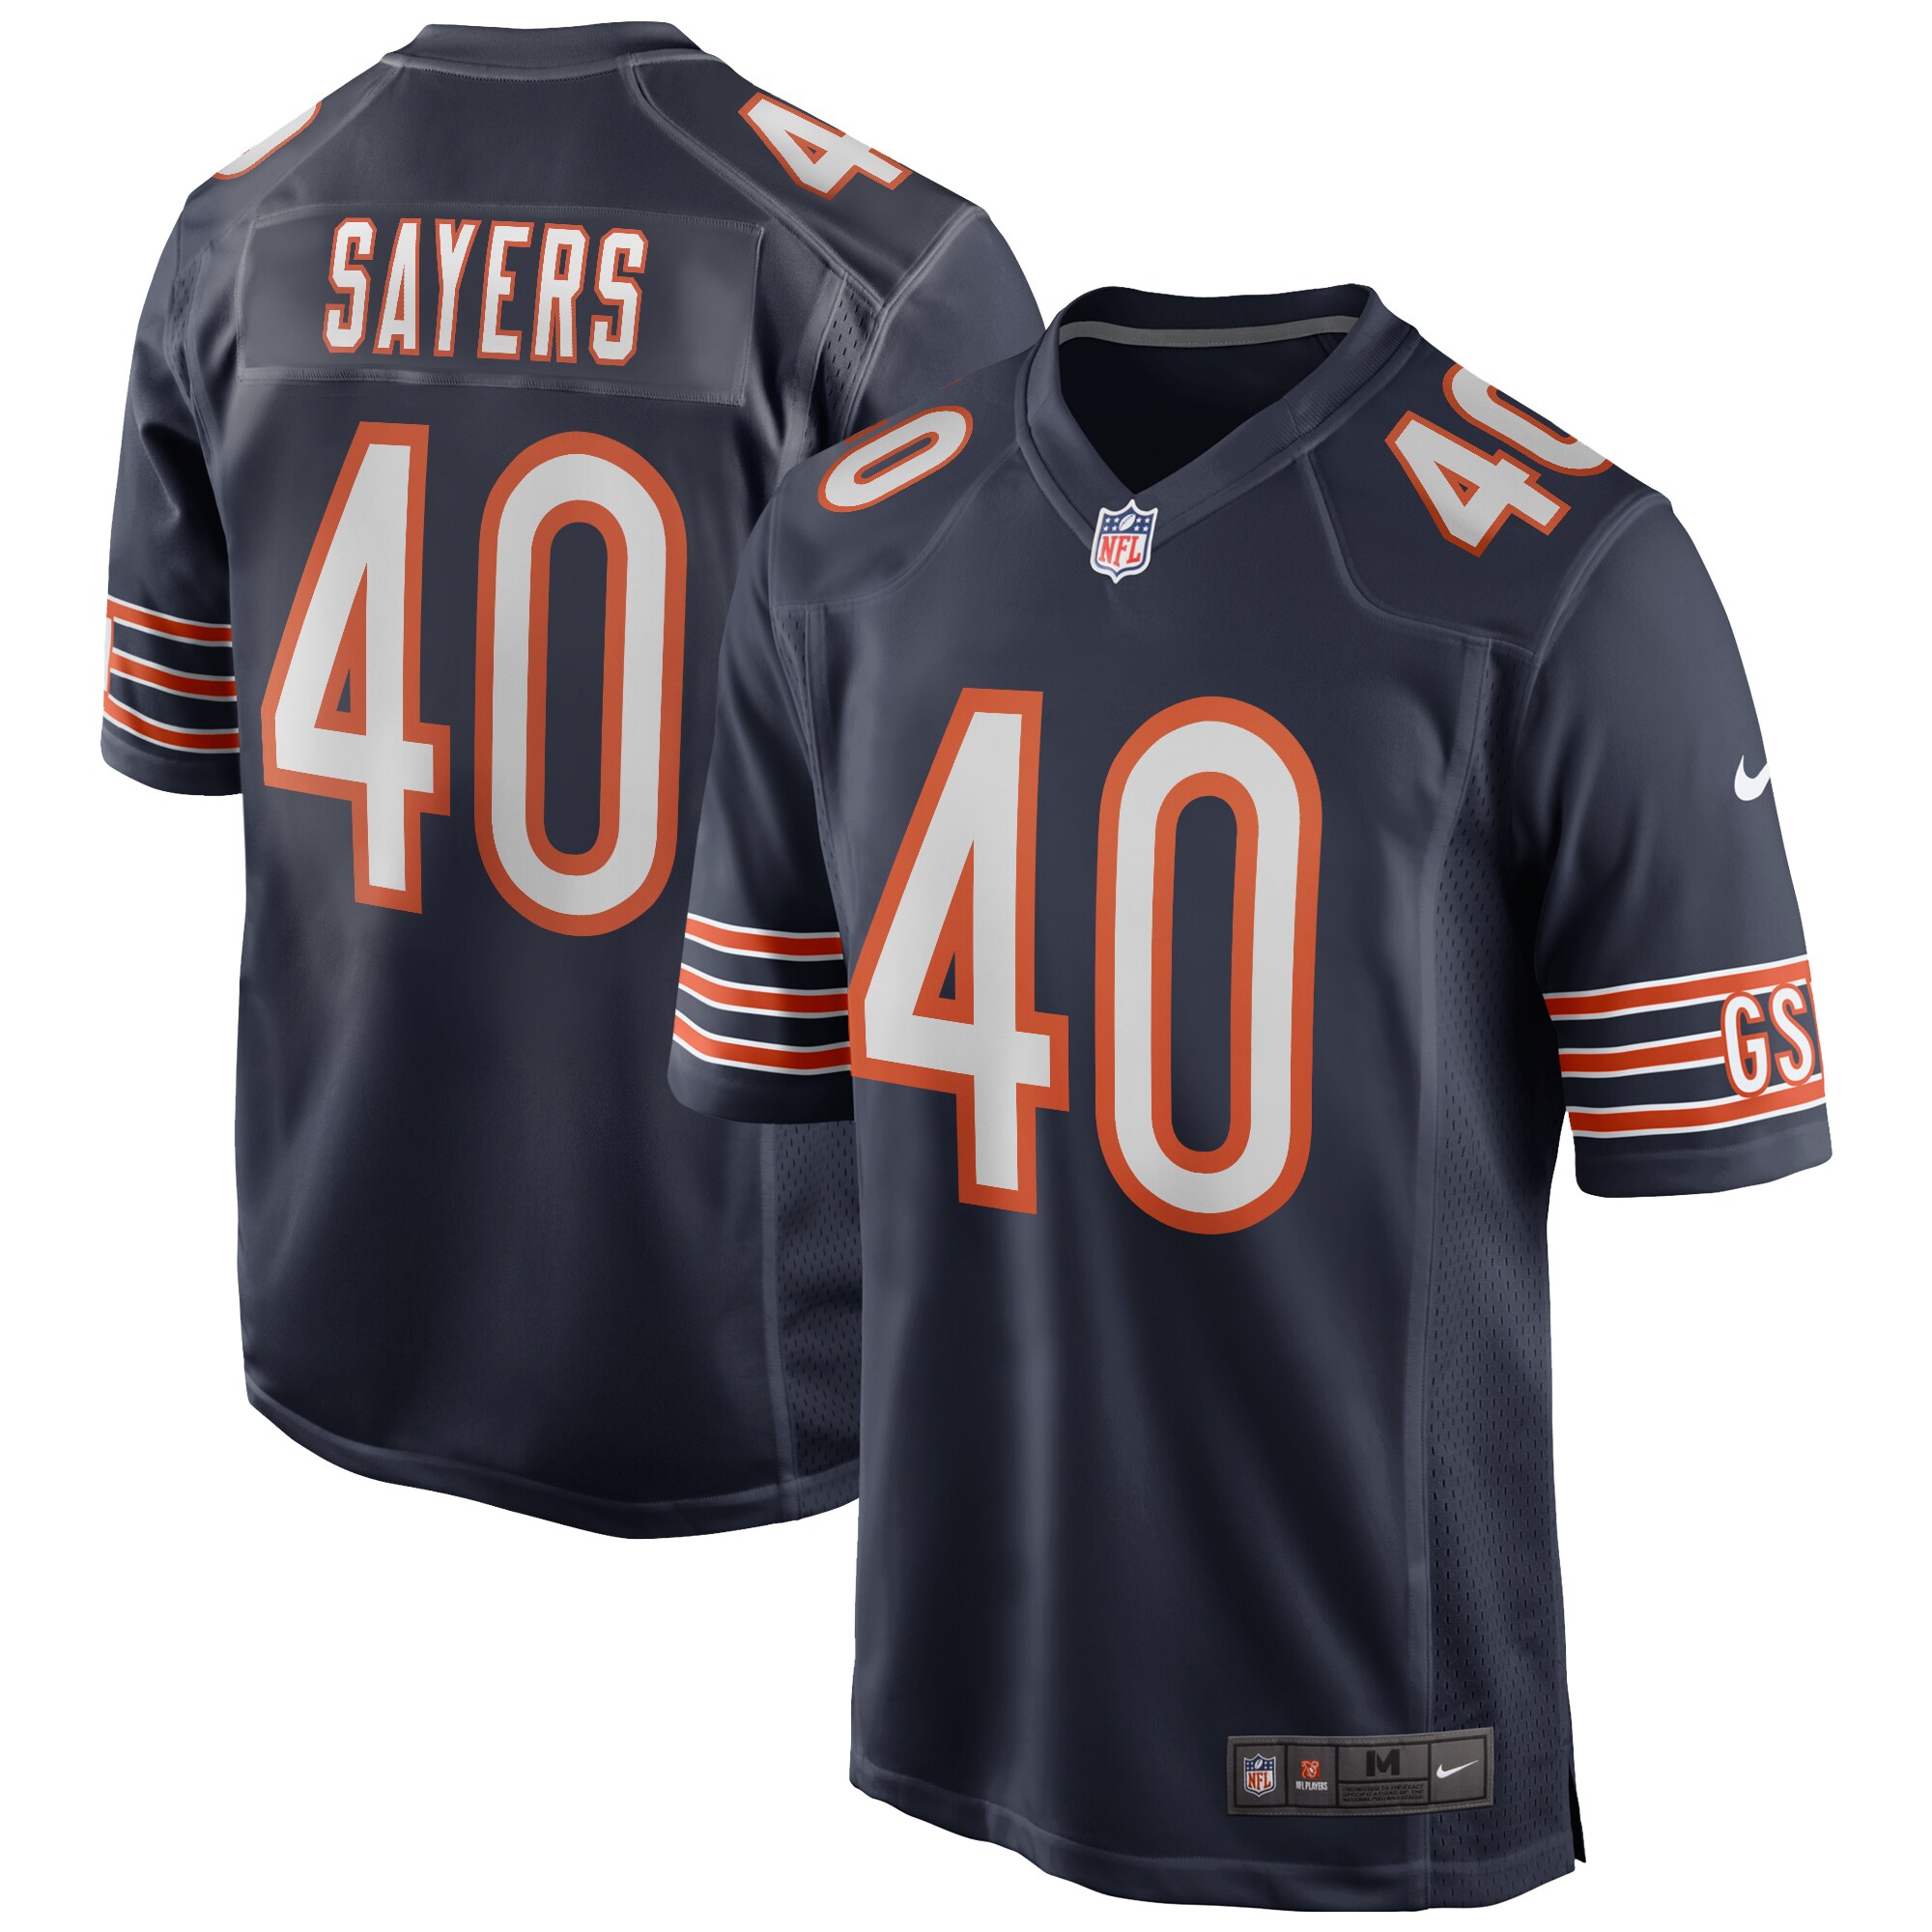 Men's Chicago Bears Gale Sayers Nike Navy Game Retired Player Jersey